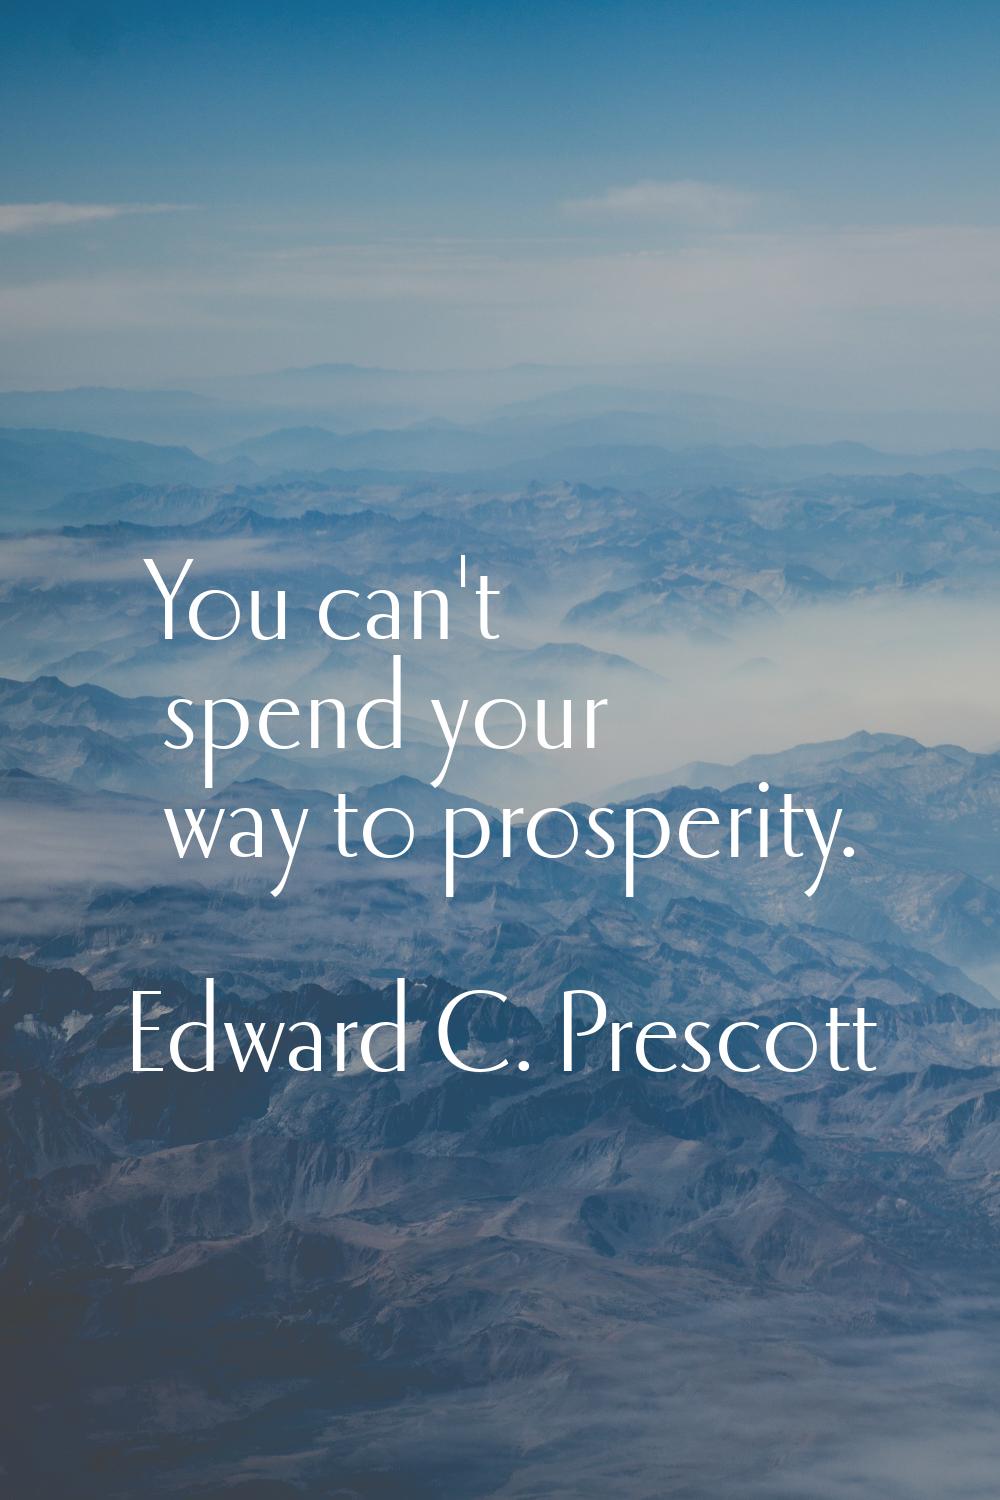 You can't spend your way to prosperity.